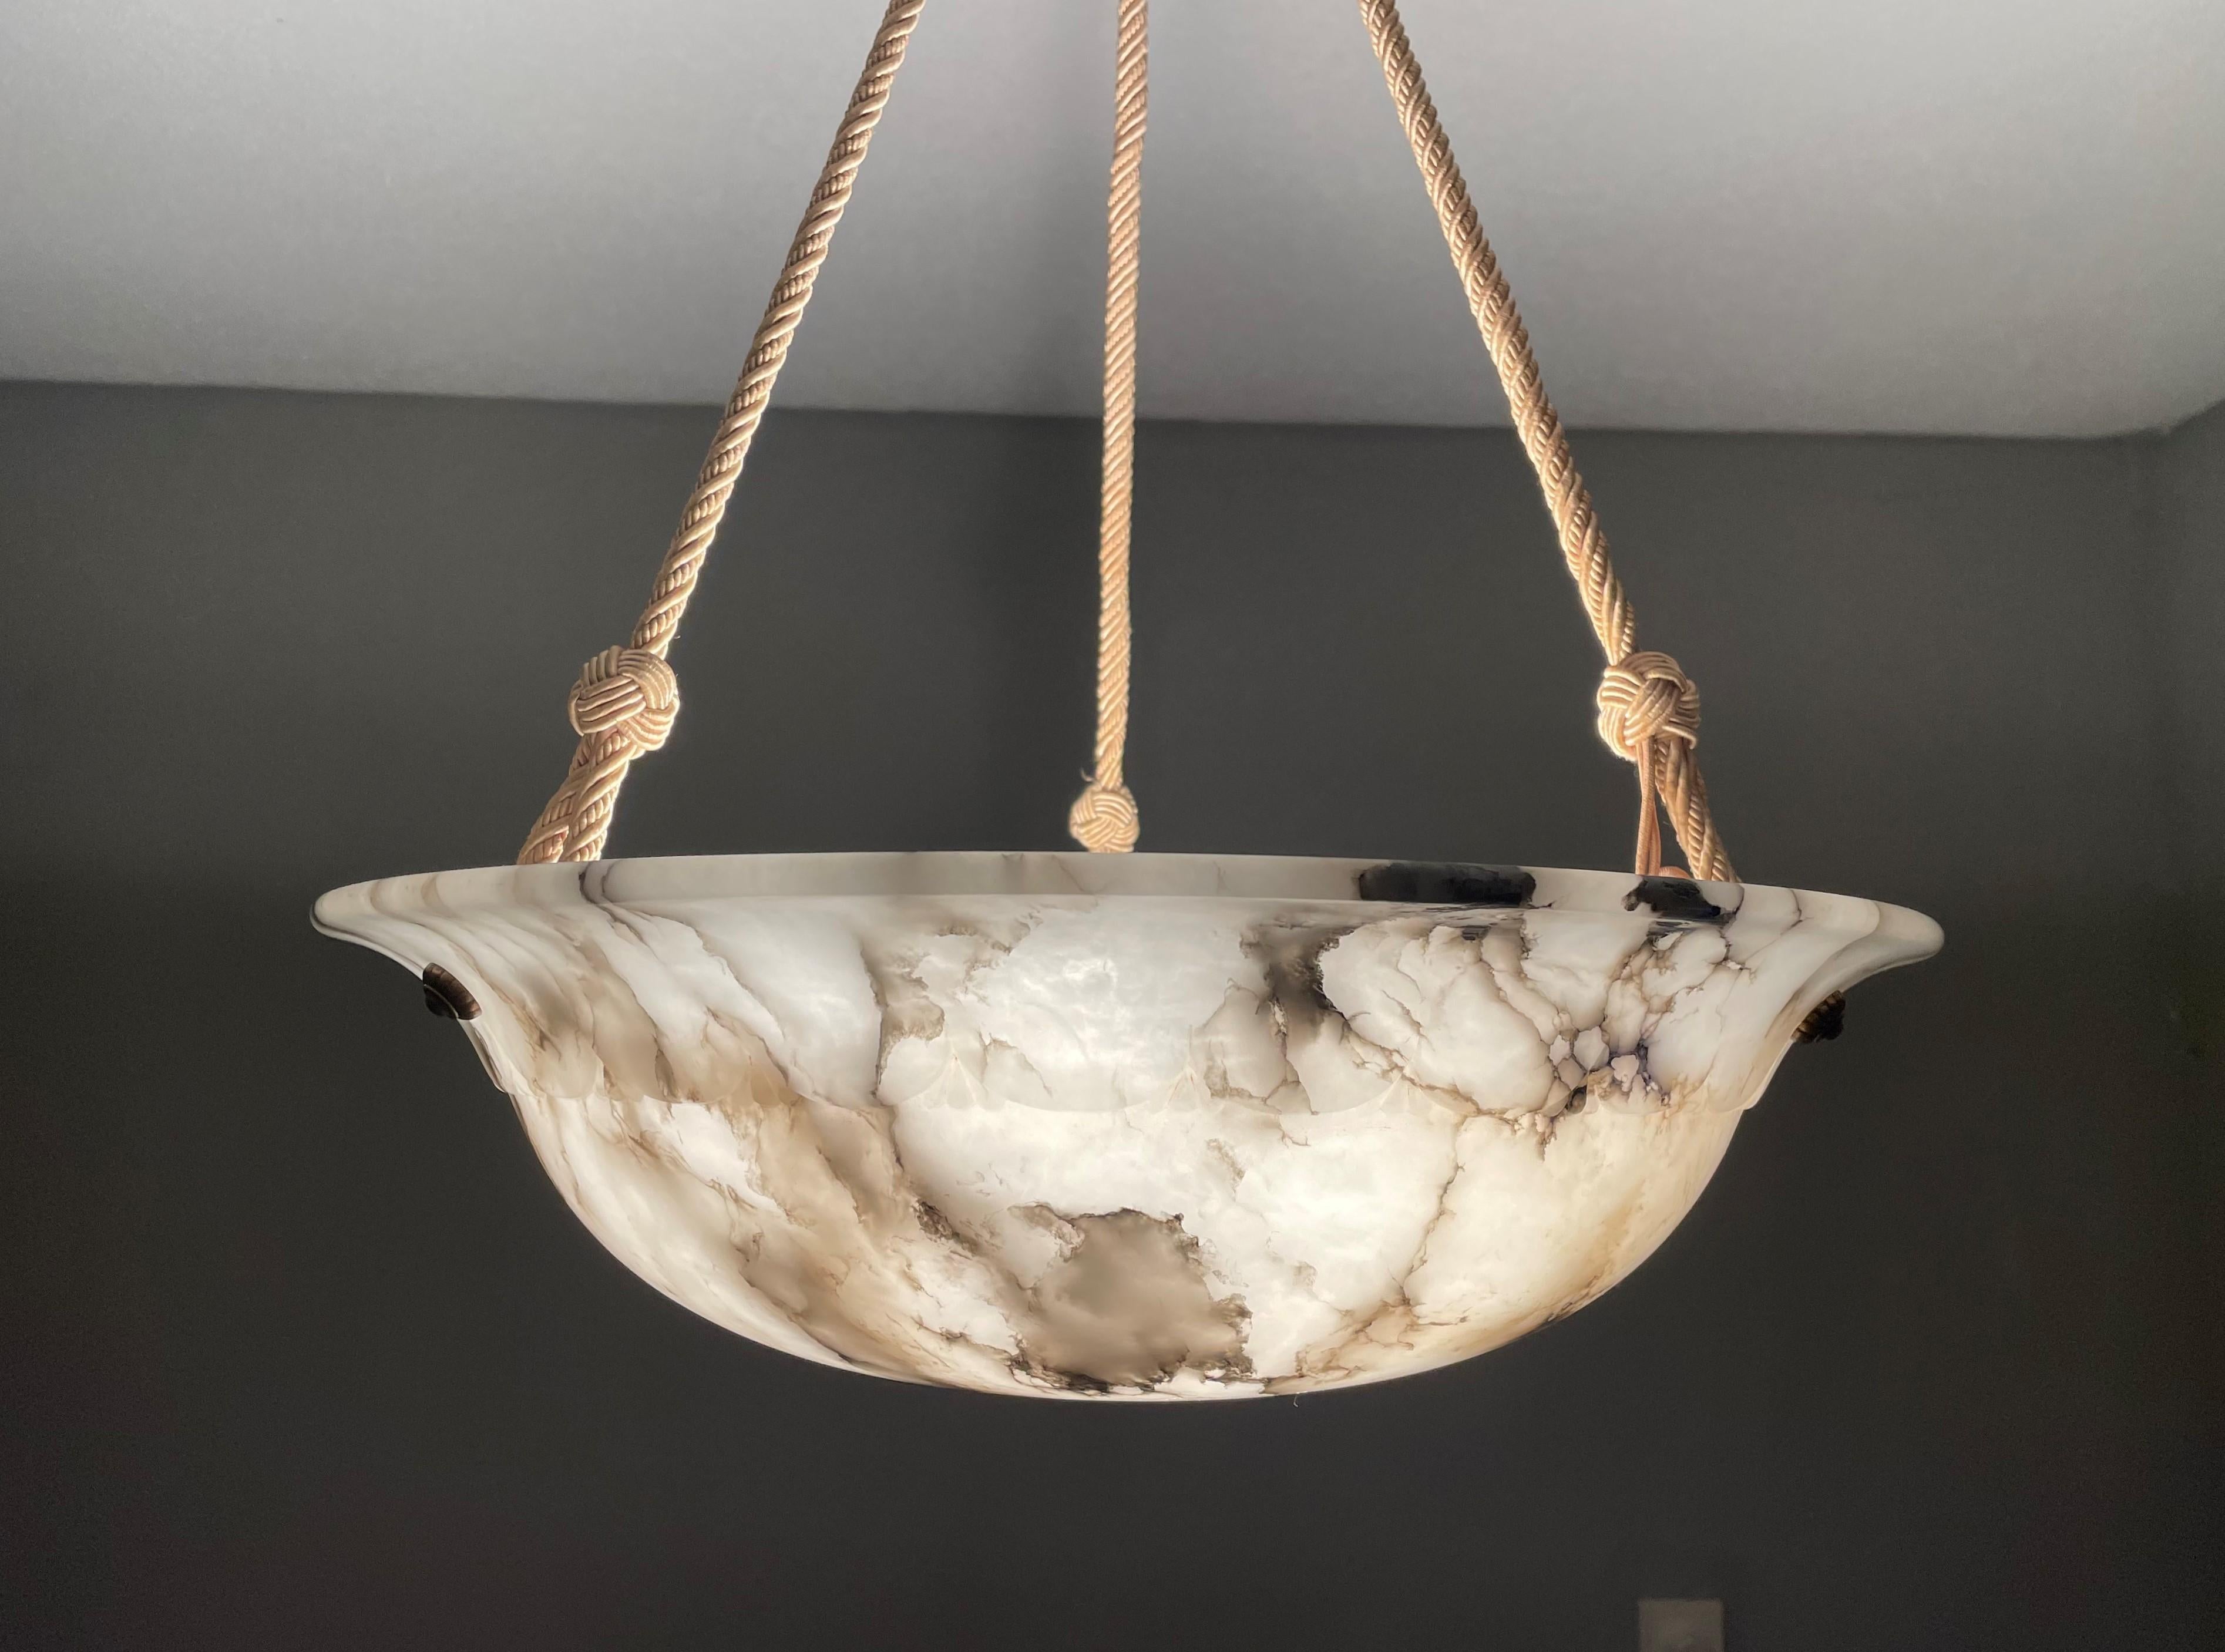 Exceptional alabaster pendant with a perfect shade and canopy.

Over the years we have seen and sold a number of alabaster pendants that were even better than the top quality ones that we sell regularly. This top quality specimen really ticks all